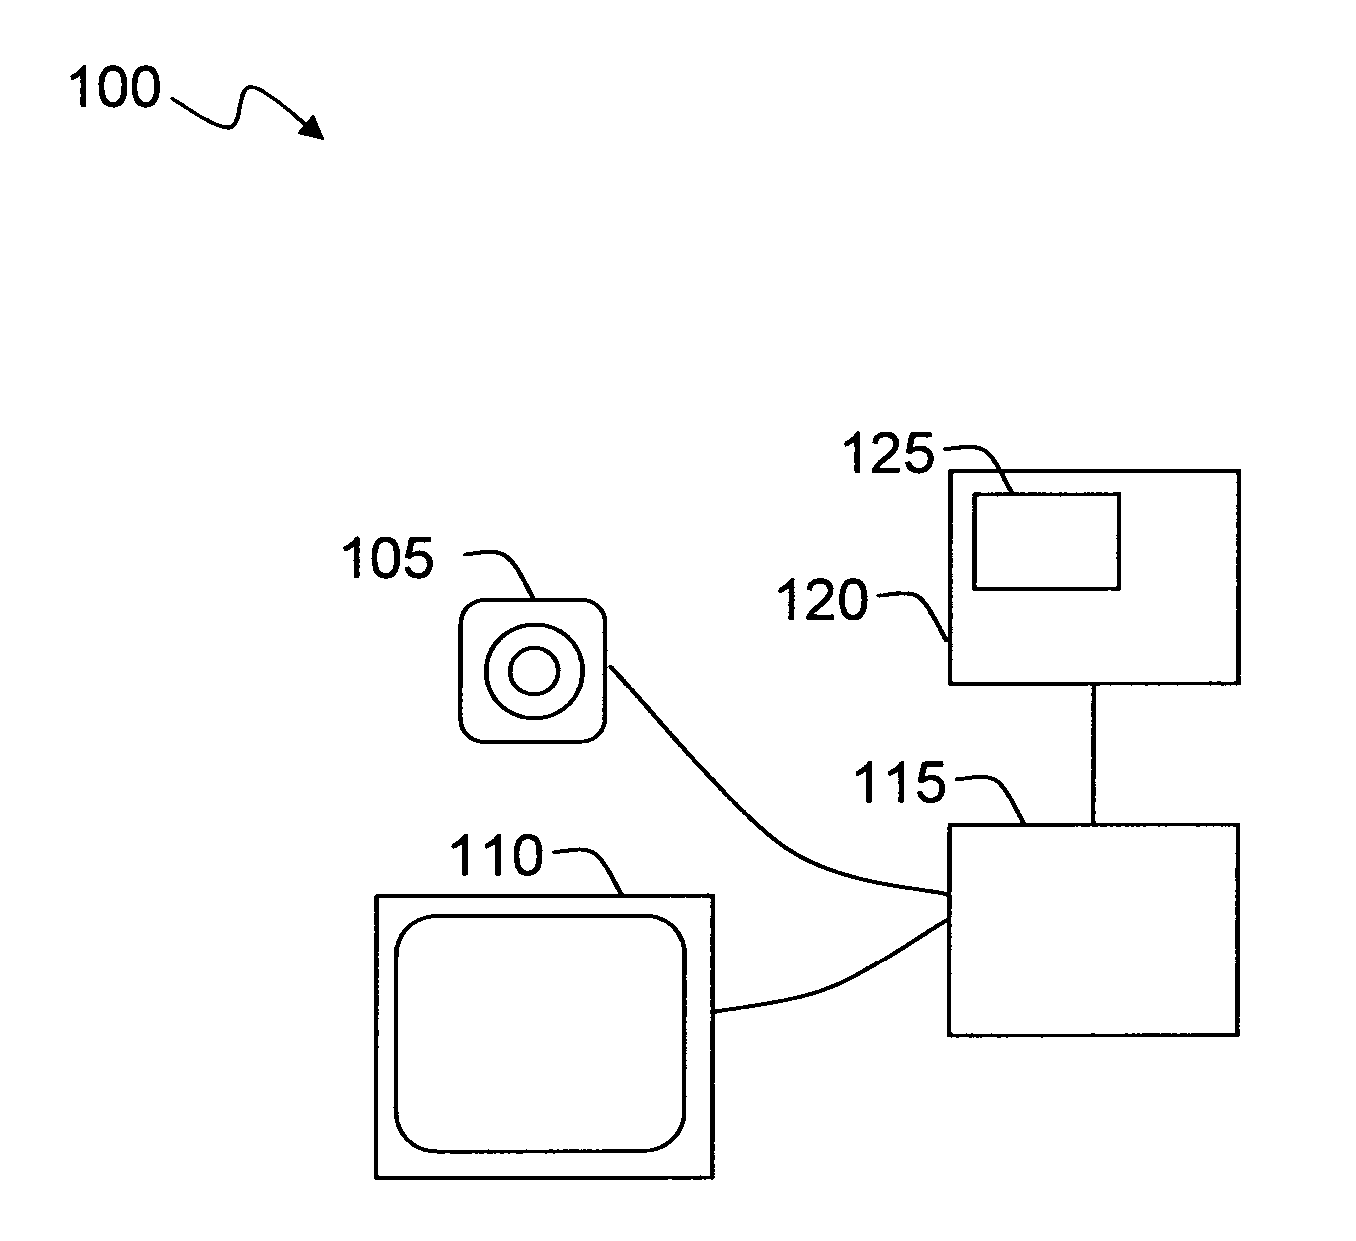 System and method of tracking an object